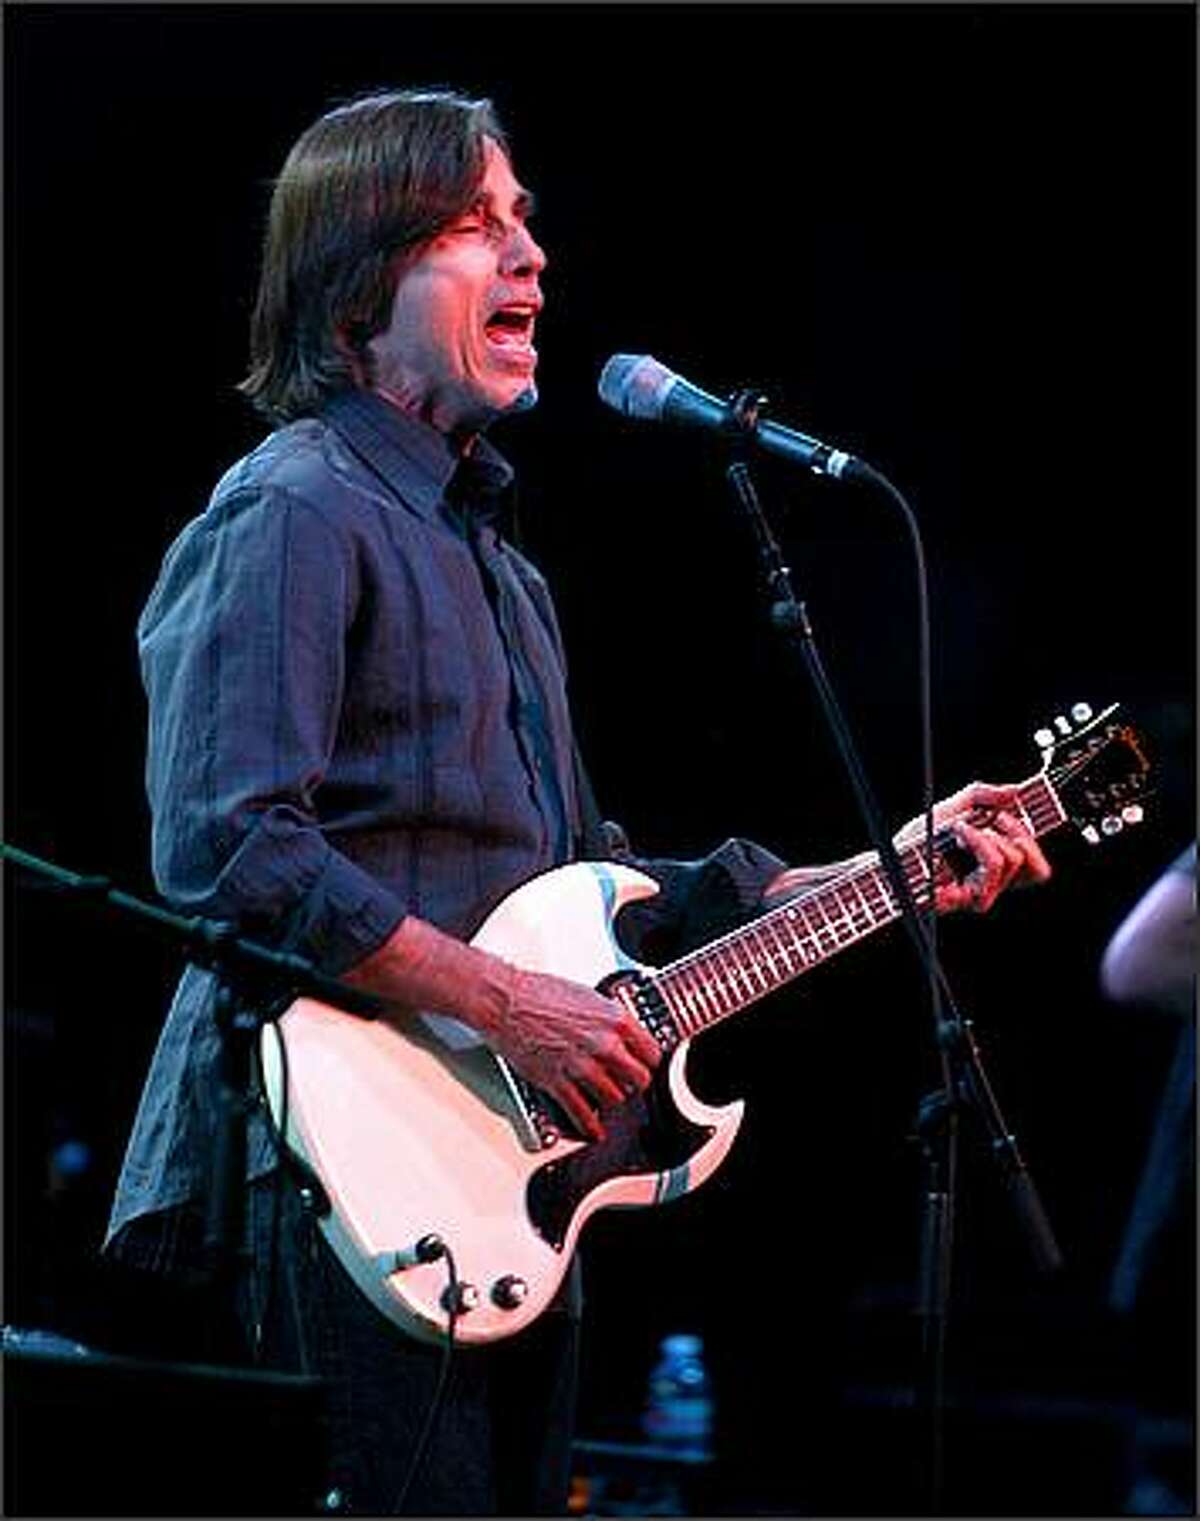 Jackson Browne belts out a song.